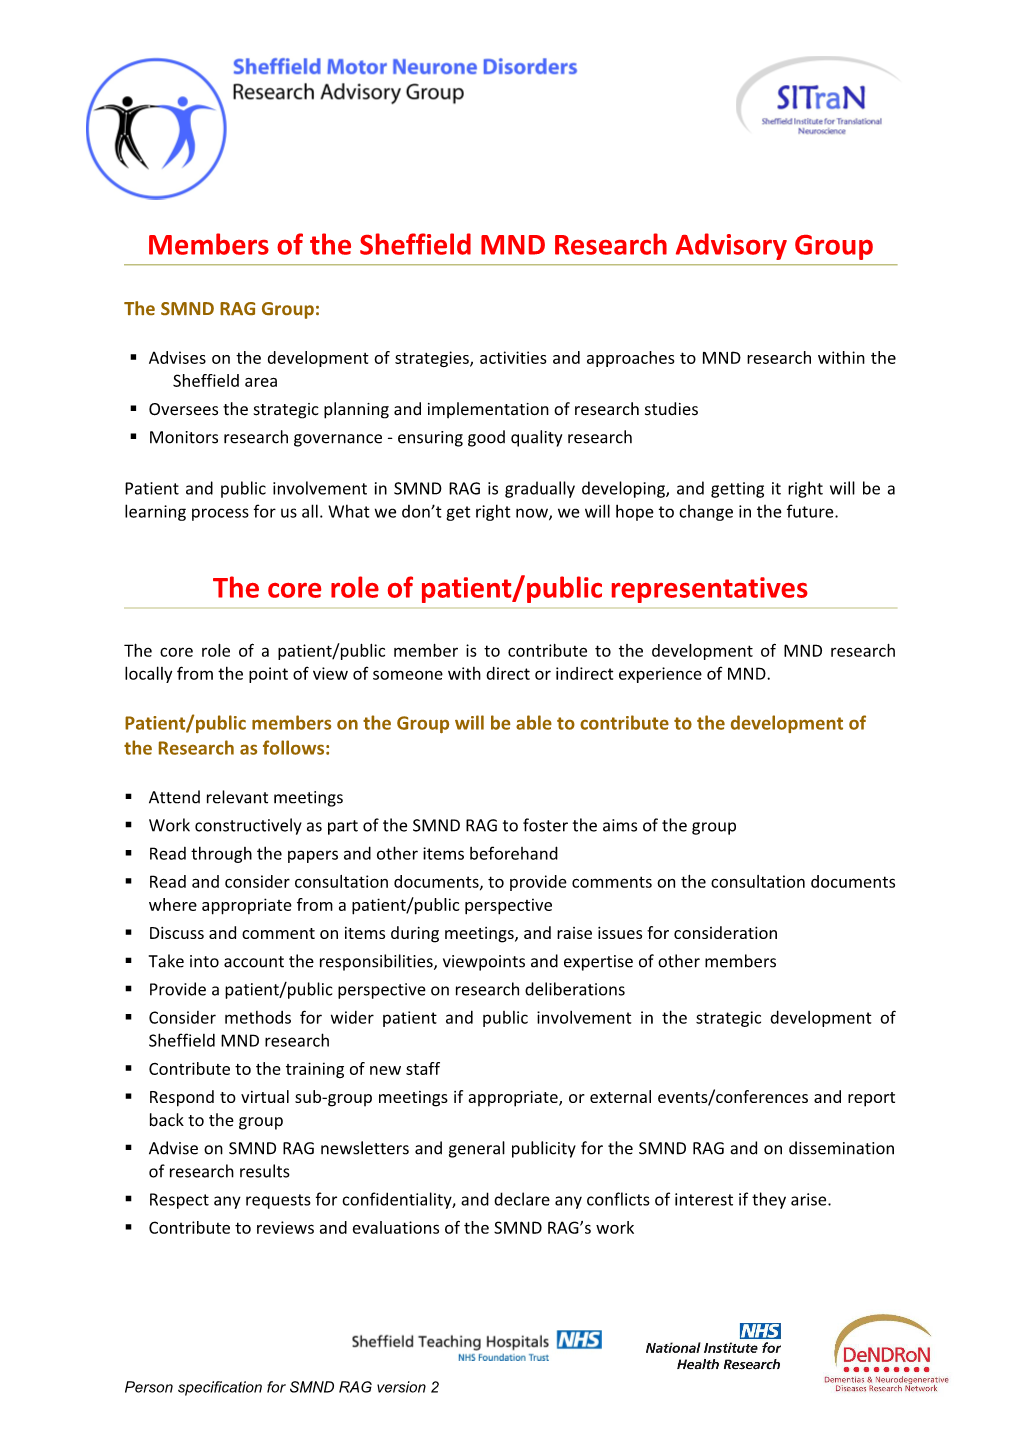 Members of the Sheffield MND Research Advisory Group